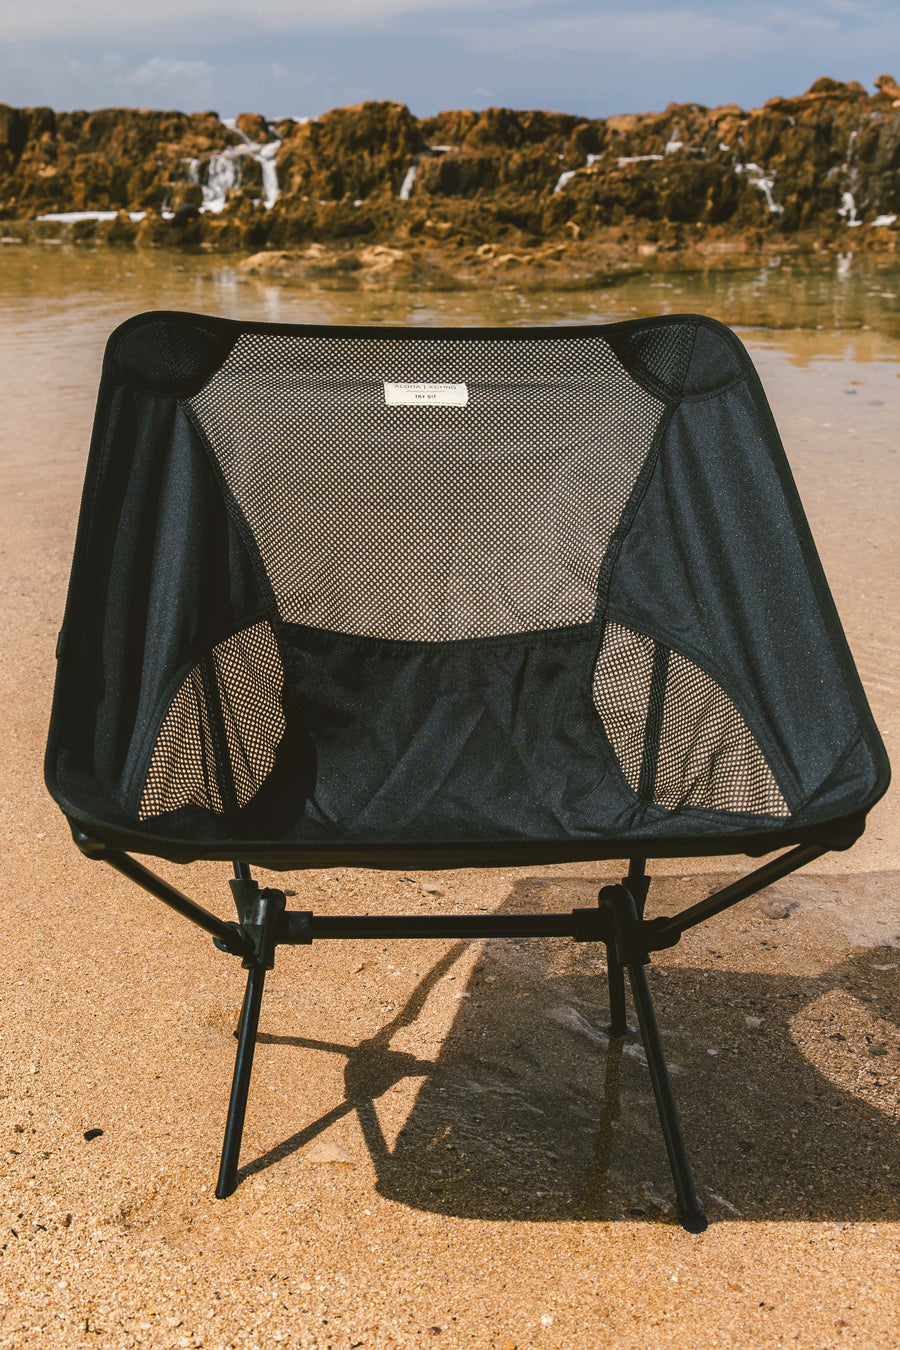 Try Sit Camp Chair